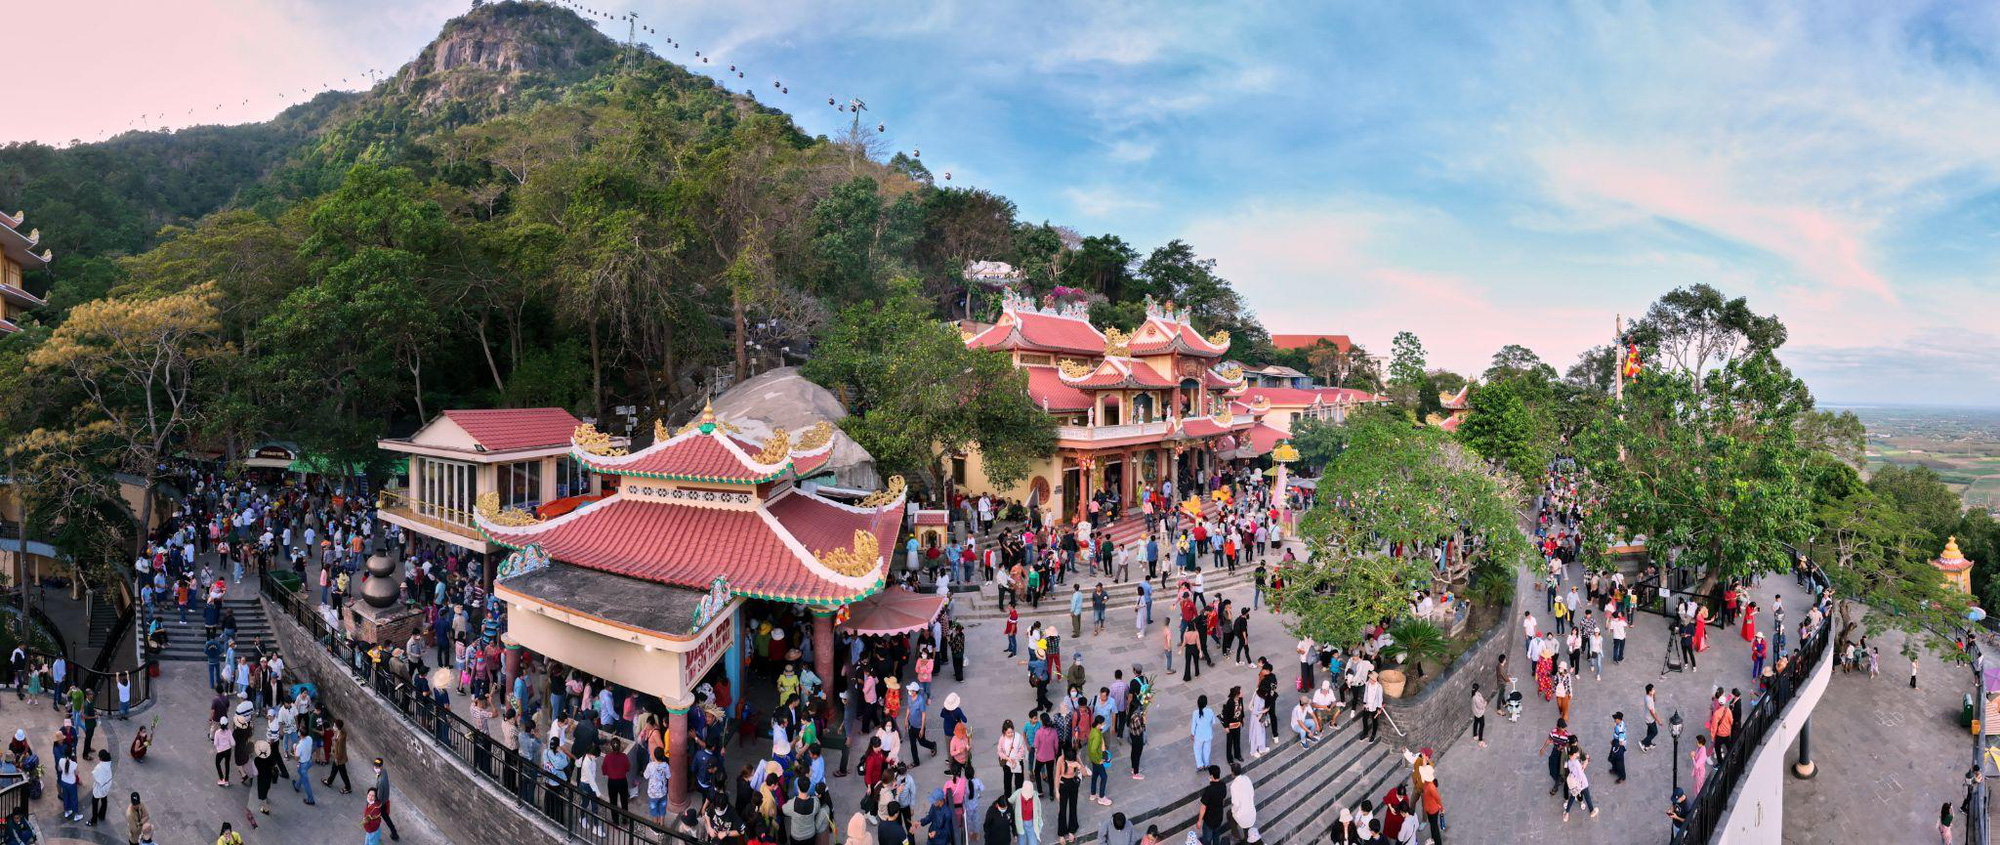 A panoramic view of the Linh Son Thanh Mau (Mother Goddess of the Mountain) temple on Ba Den Mountain in Tay Ninh Province, southern Vietnam. Photo: Supplied